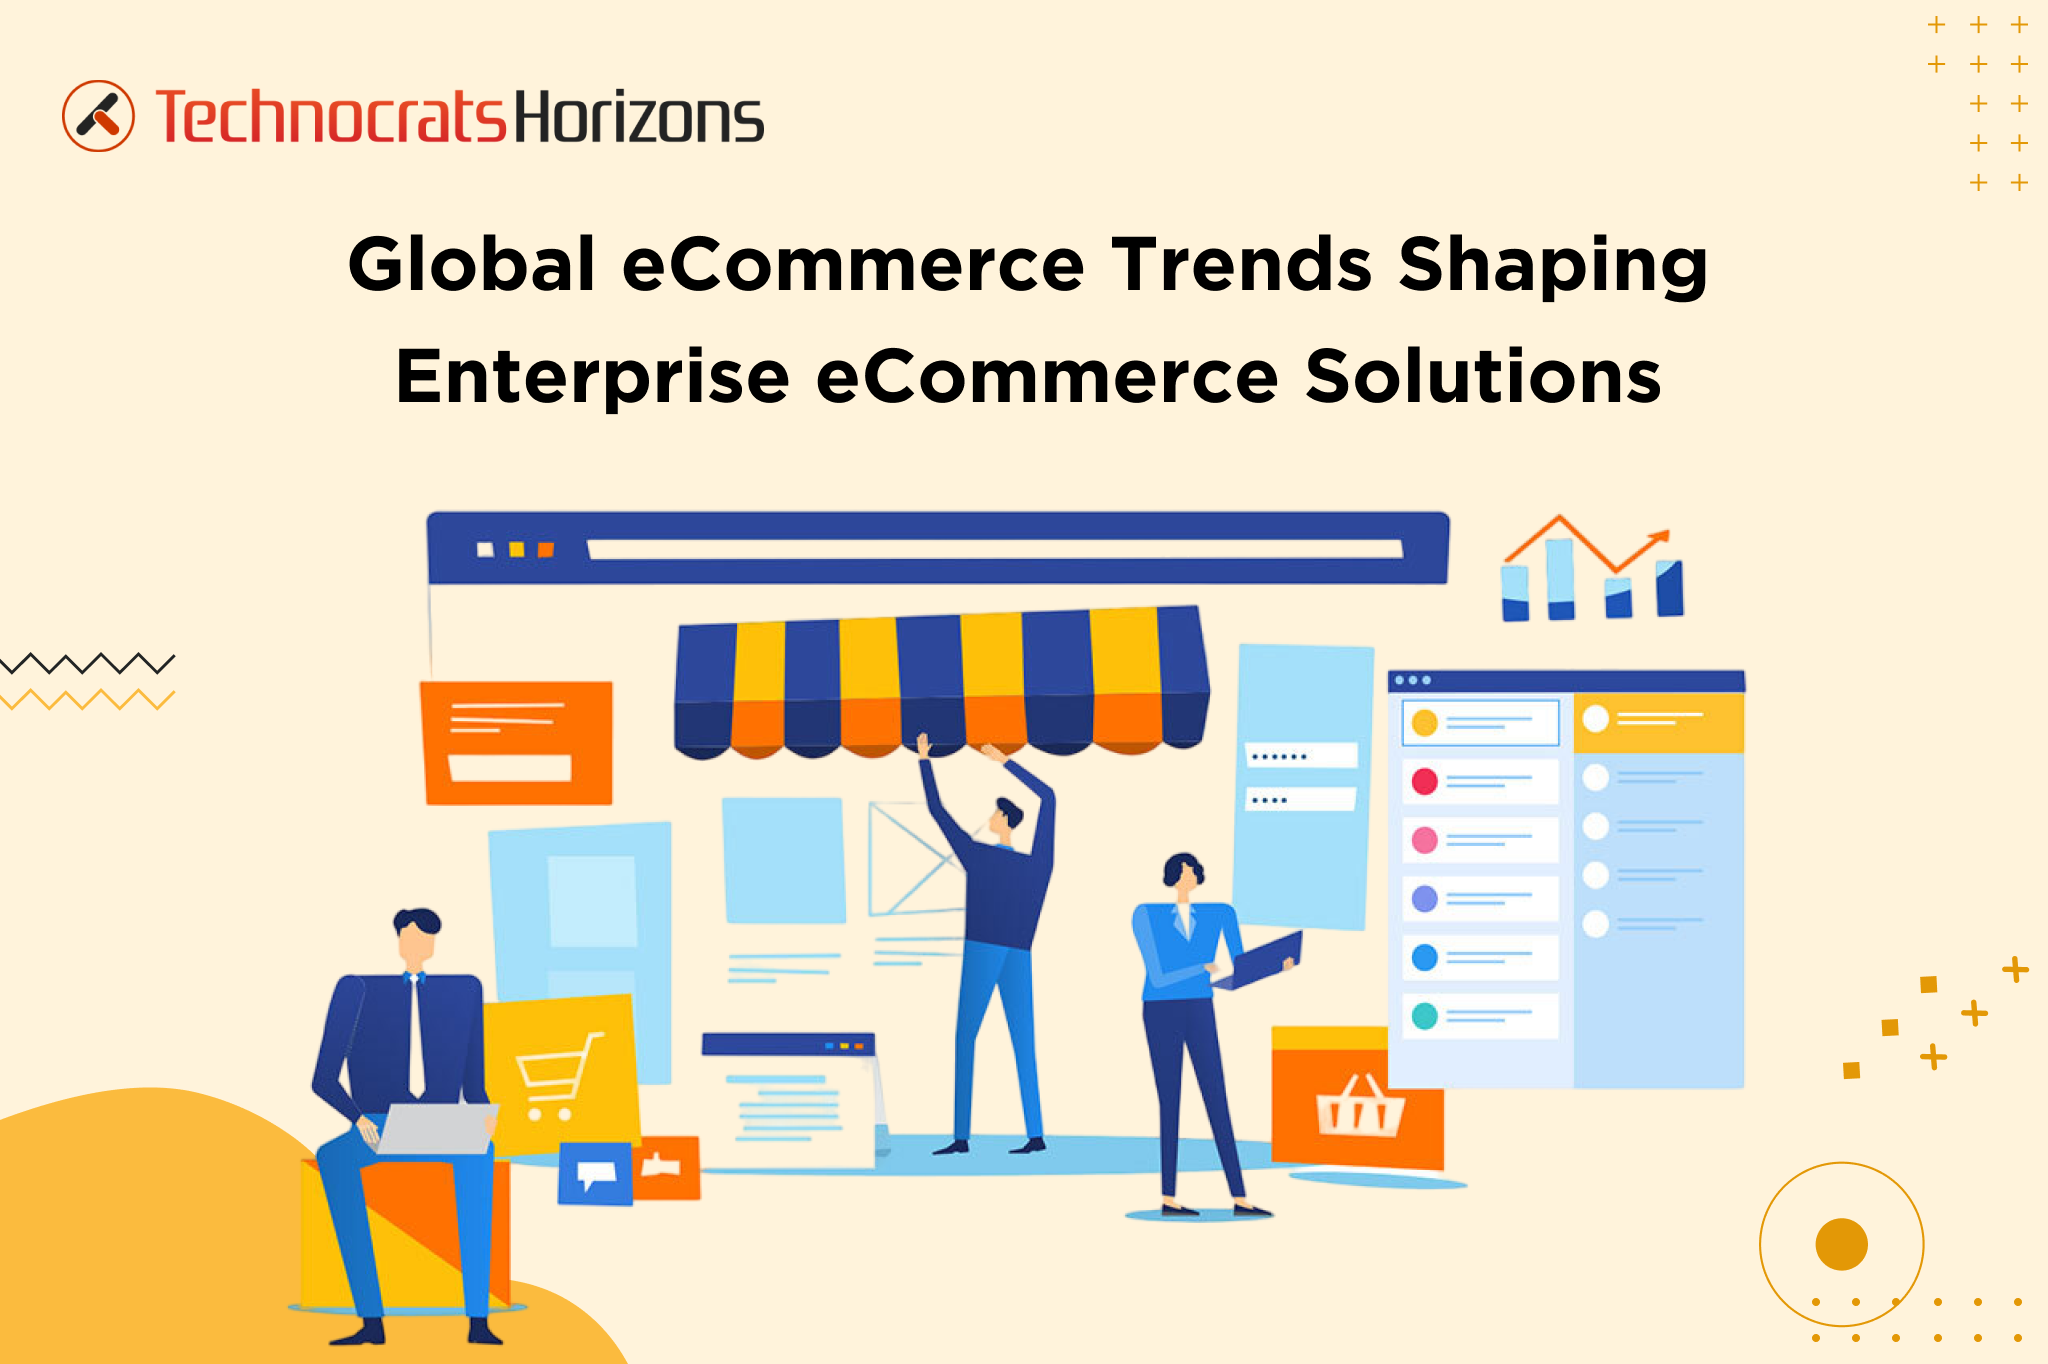 Global eCommerce Trends Shaping Enterprise eCommerce Solutions